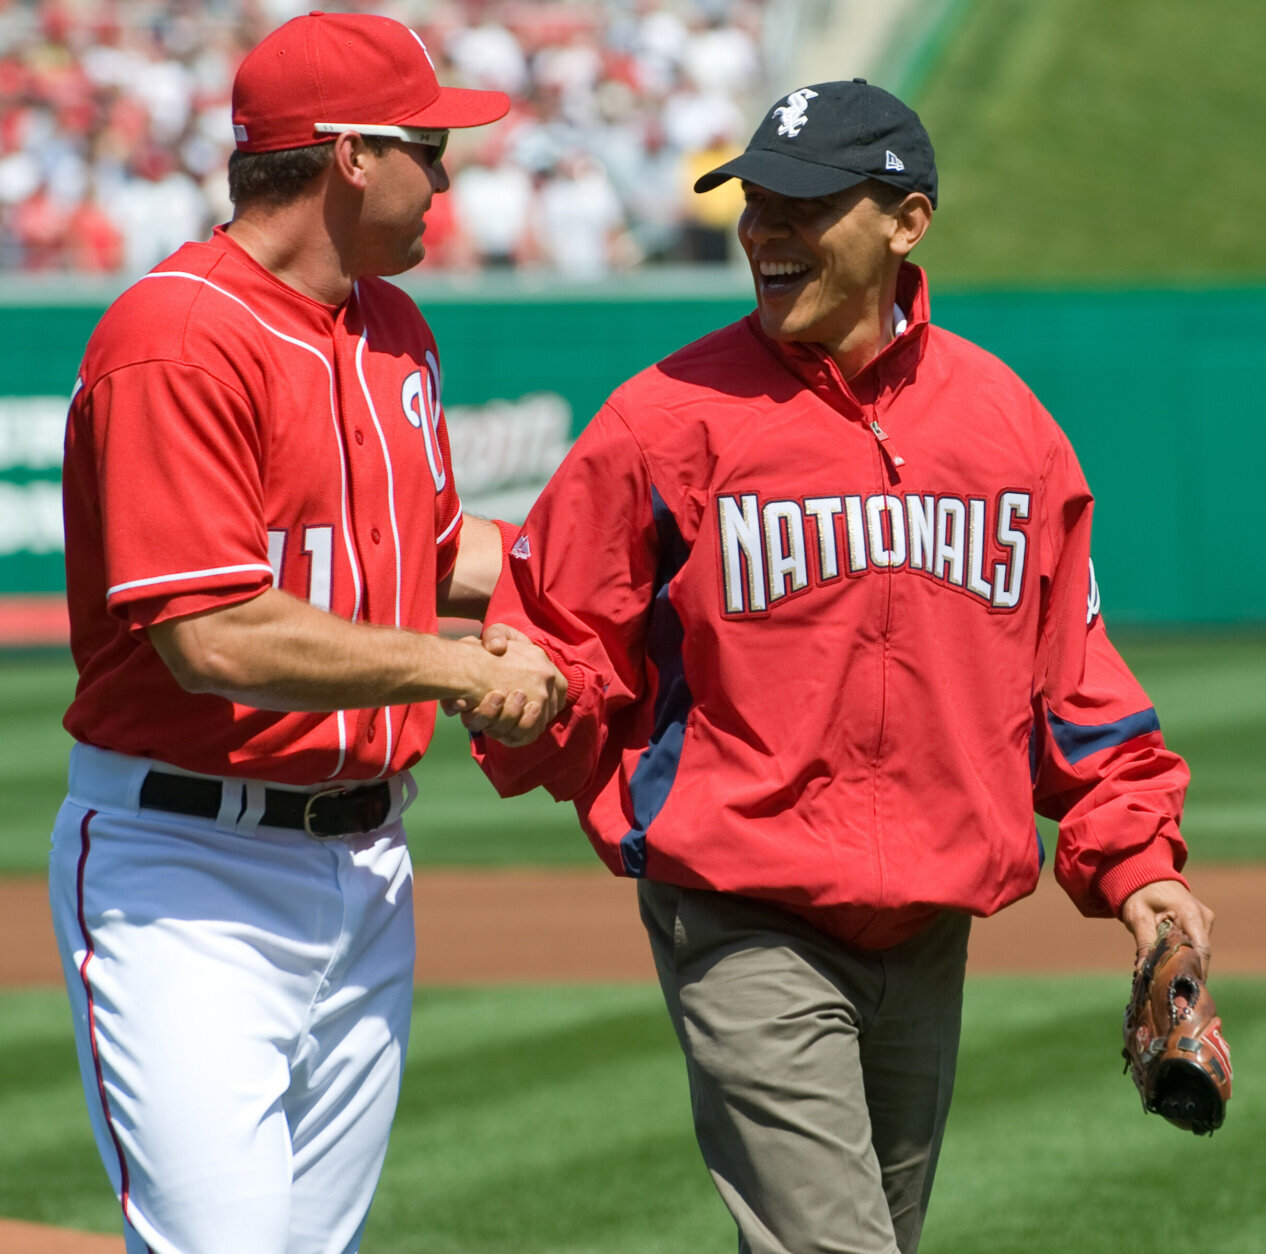 <p>Mr. National meet Mr. President. Zimmerman had the honor of catching President Barack Obama&#8217;s first pitch at Nationals Park on Opening Day 2010. Let&#8217;s hope he reminded the president to wear the right hat next time.</p>
